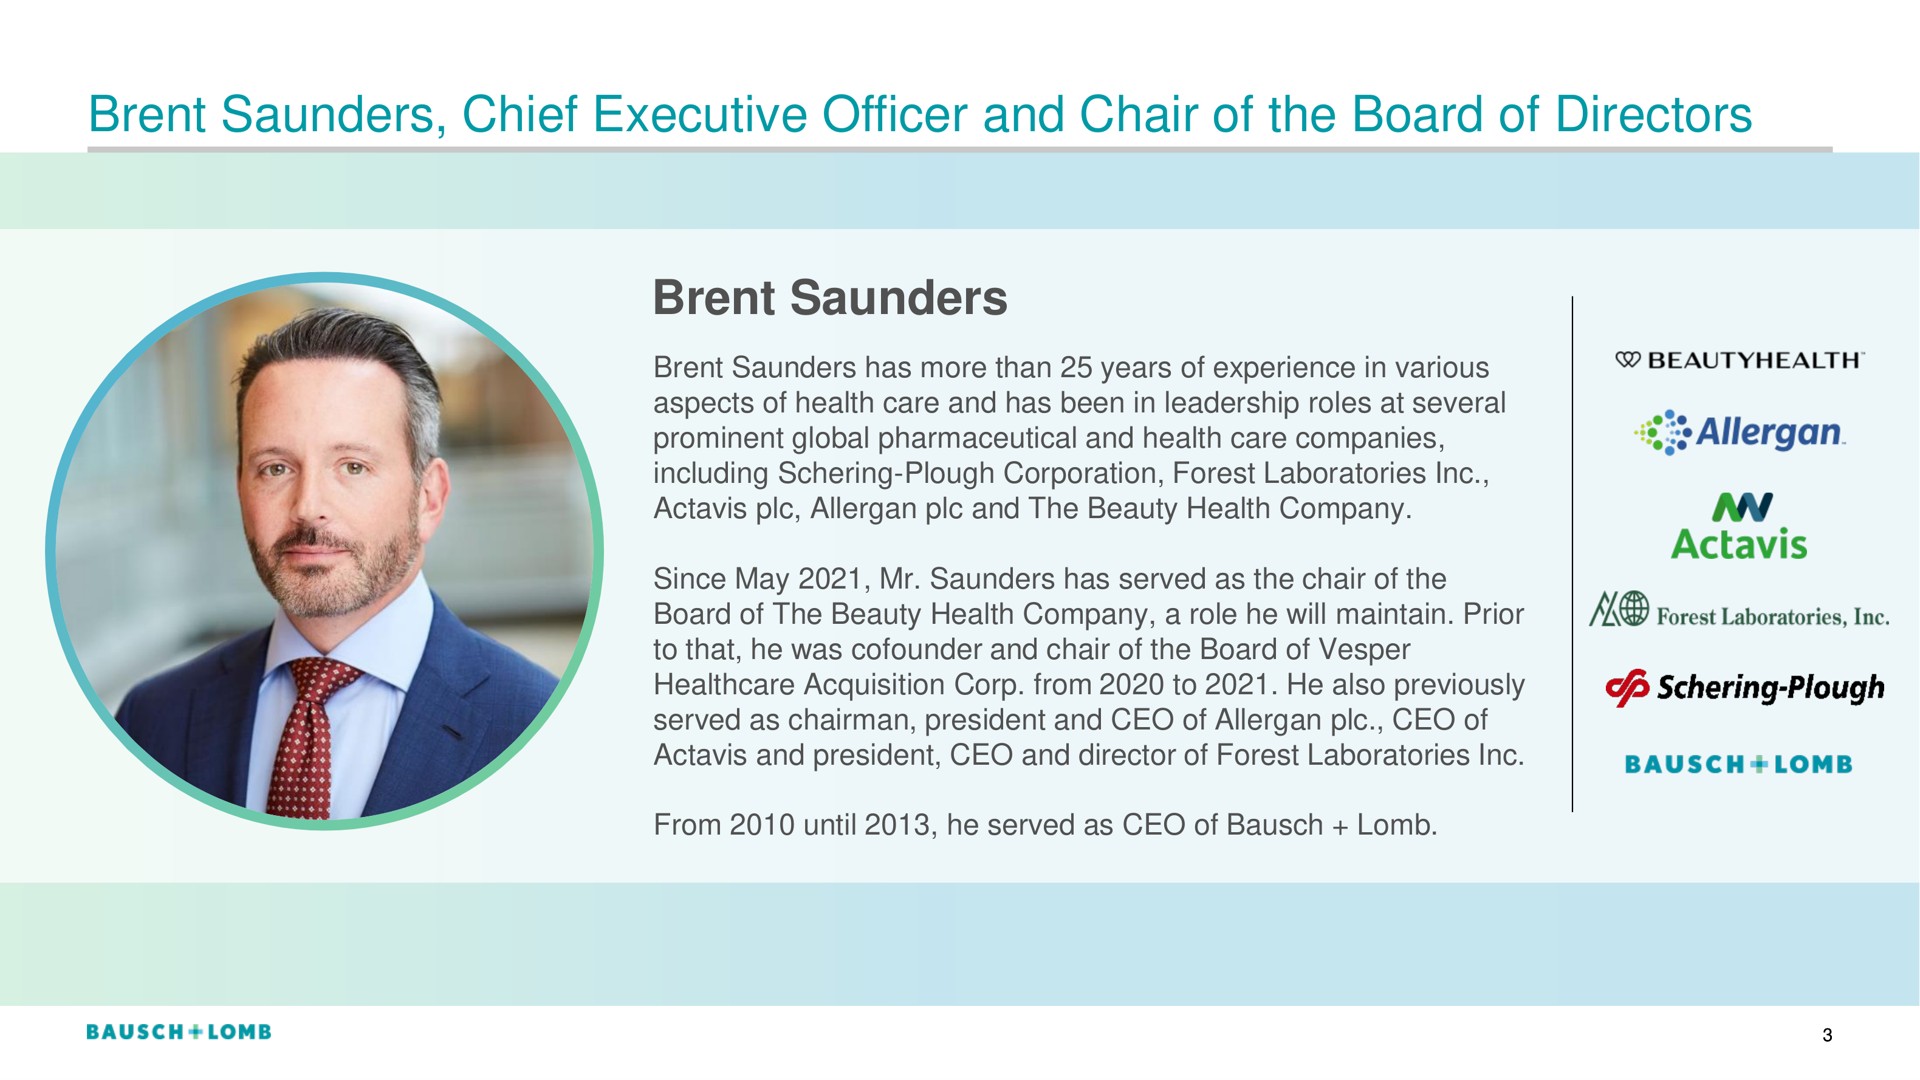 brent saunders chief executive officer and chair of the board of directors brent saunders | Bausch+Lomb